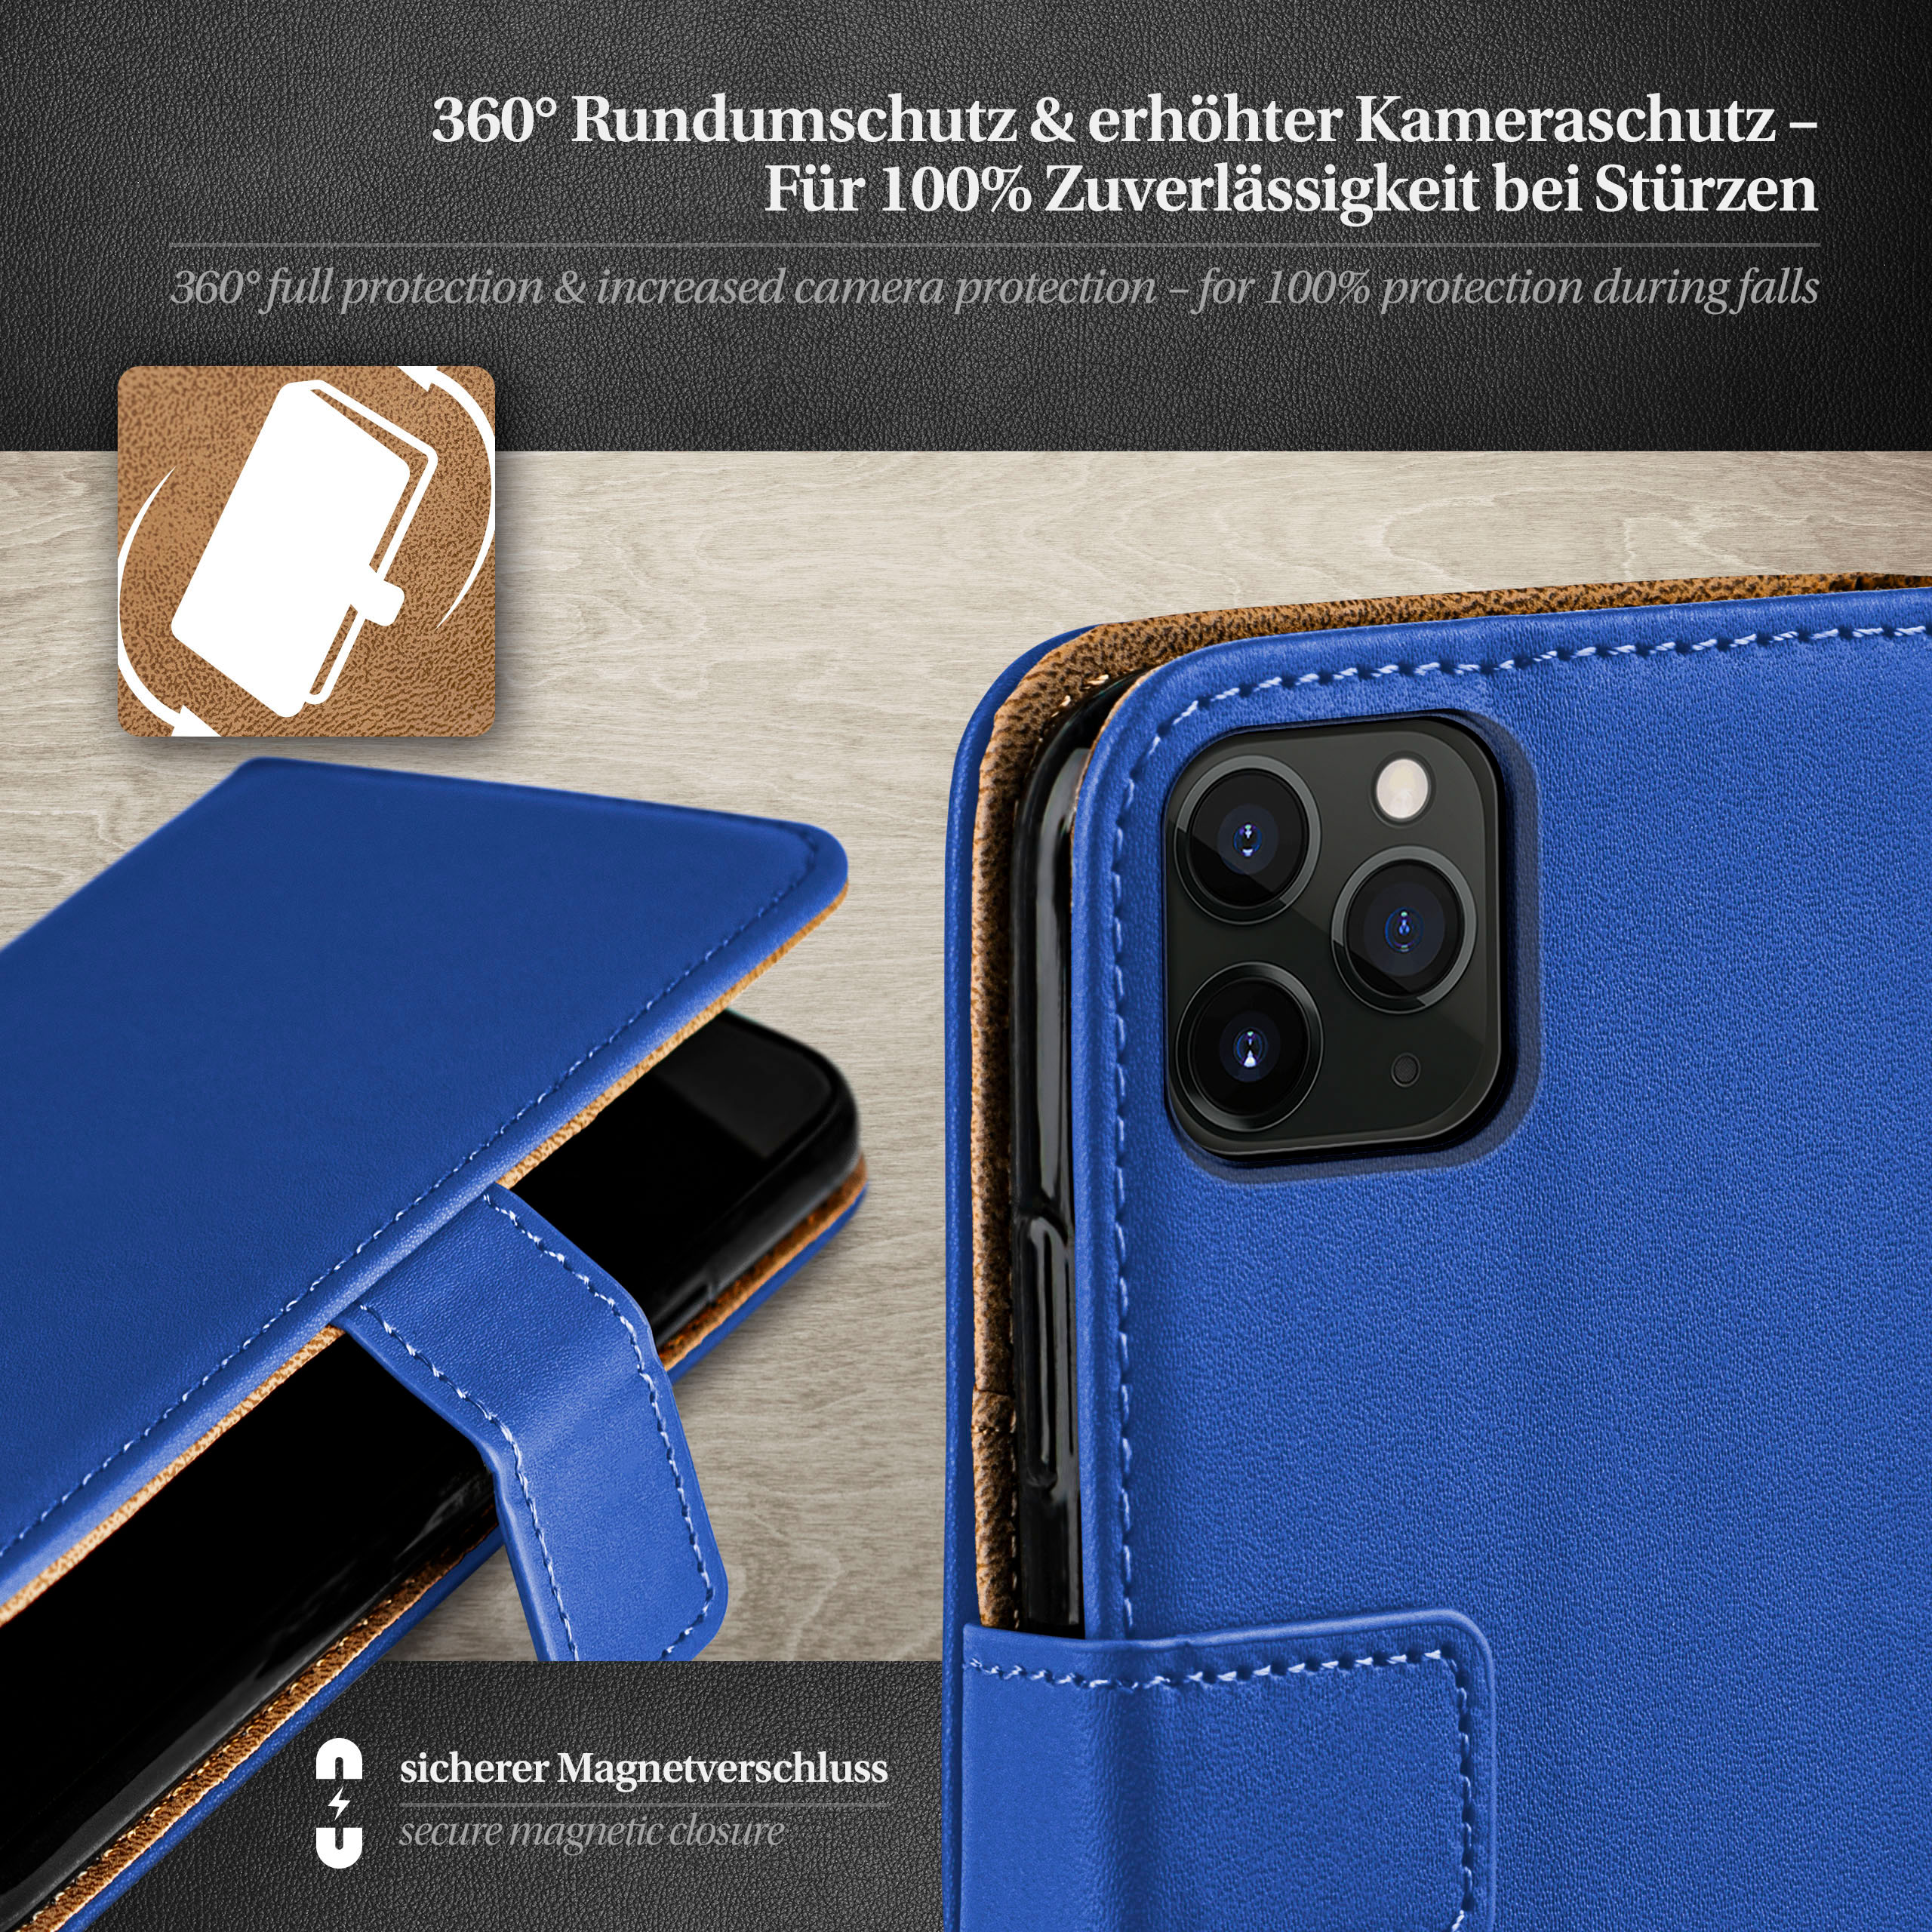 Pro, Book Royal-Blue 11 iPhone MOEX Apple, Case, Bookcover,